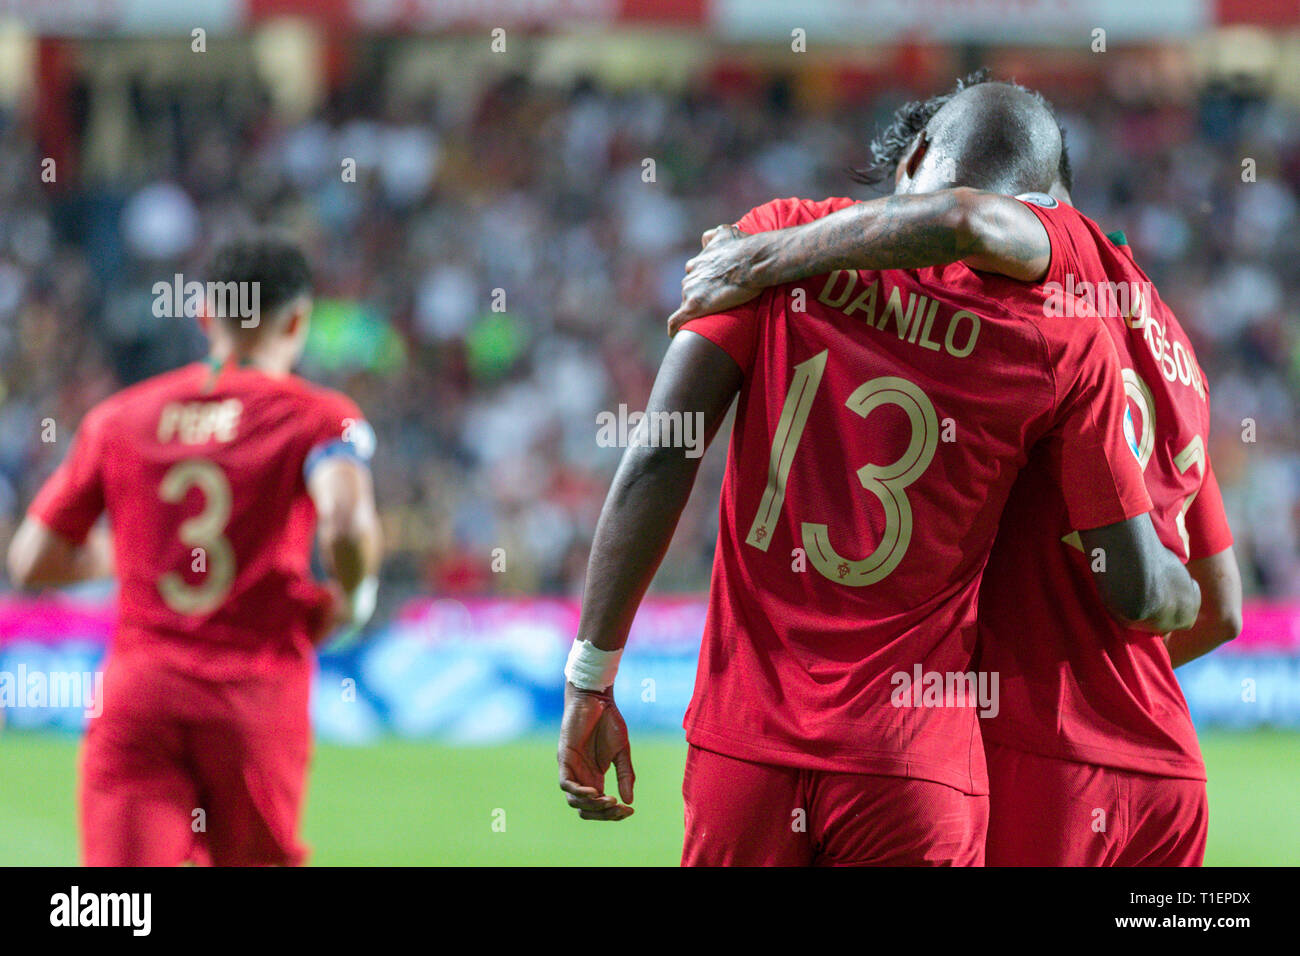 Lisbon, Portugal. 25th Mar, 2019. March 25, 2019. Lisbon, Portugal. Portugal's and Porto midfielder Danilo Pereira (13) celebrating with Portugal's and Braga forward Dyego Sousa (23) after scoring a goal during the European Championship 2020 Qualifying Round between Portugal and Serbia Credit: Alexandre de Sousa/Alamy Live News Stock Photo